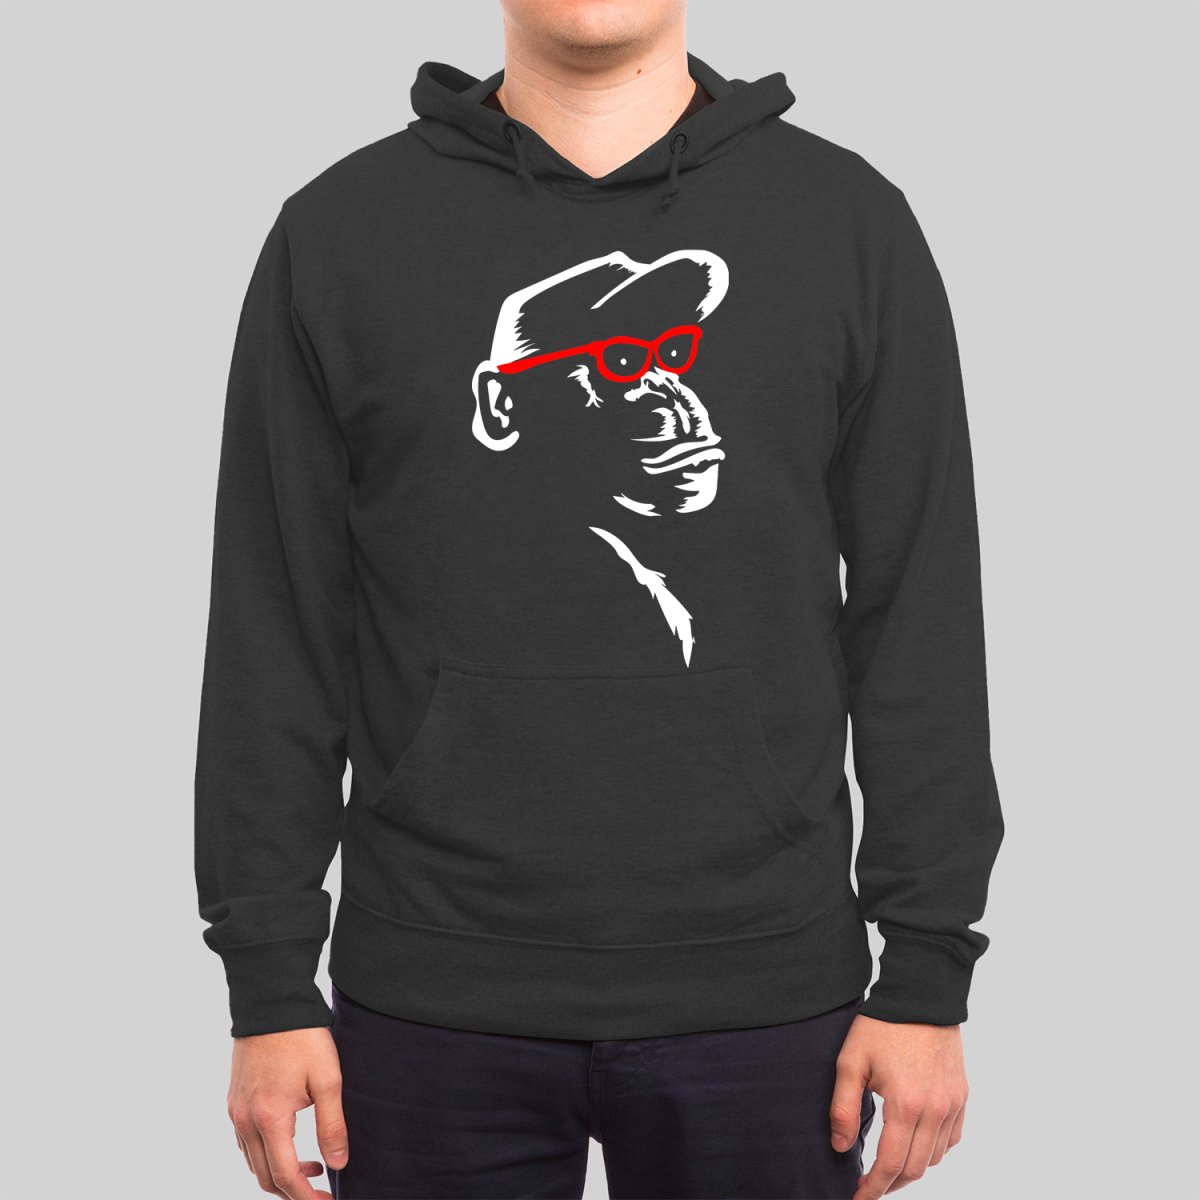 Monkey With Red Glasses Hoodie - Geeksoutfit